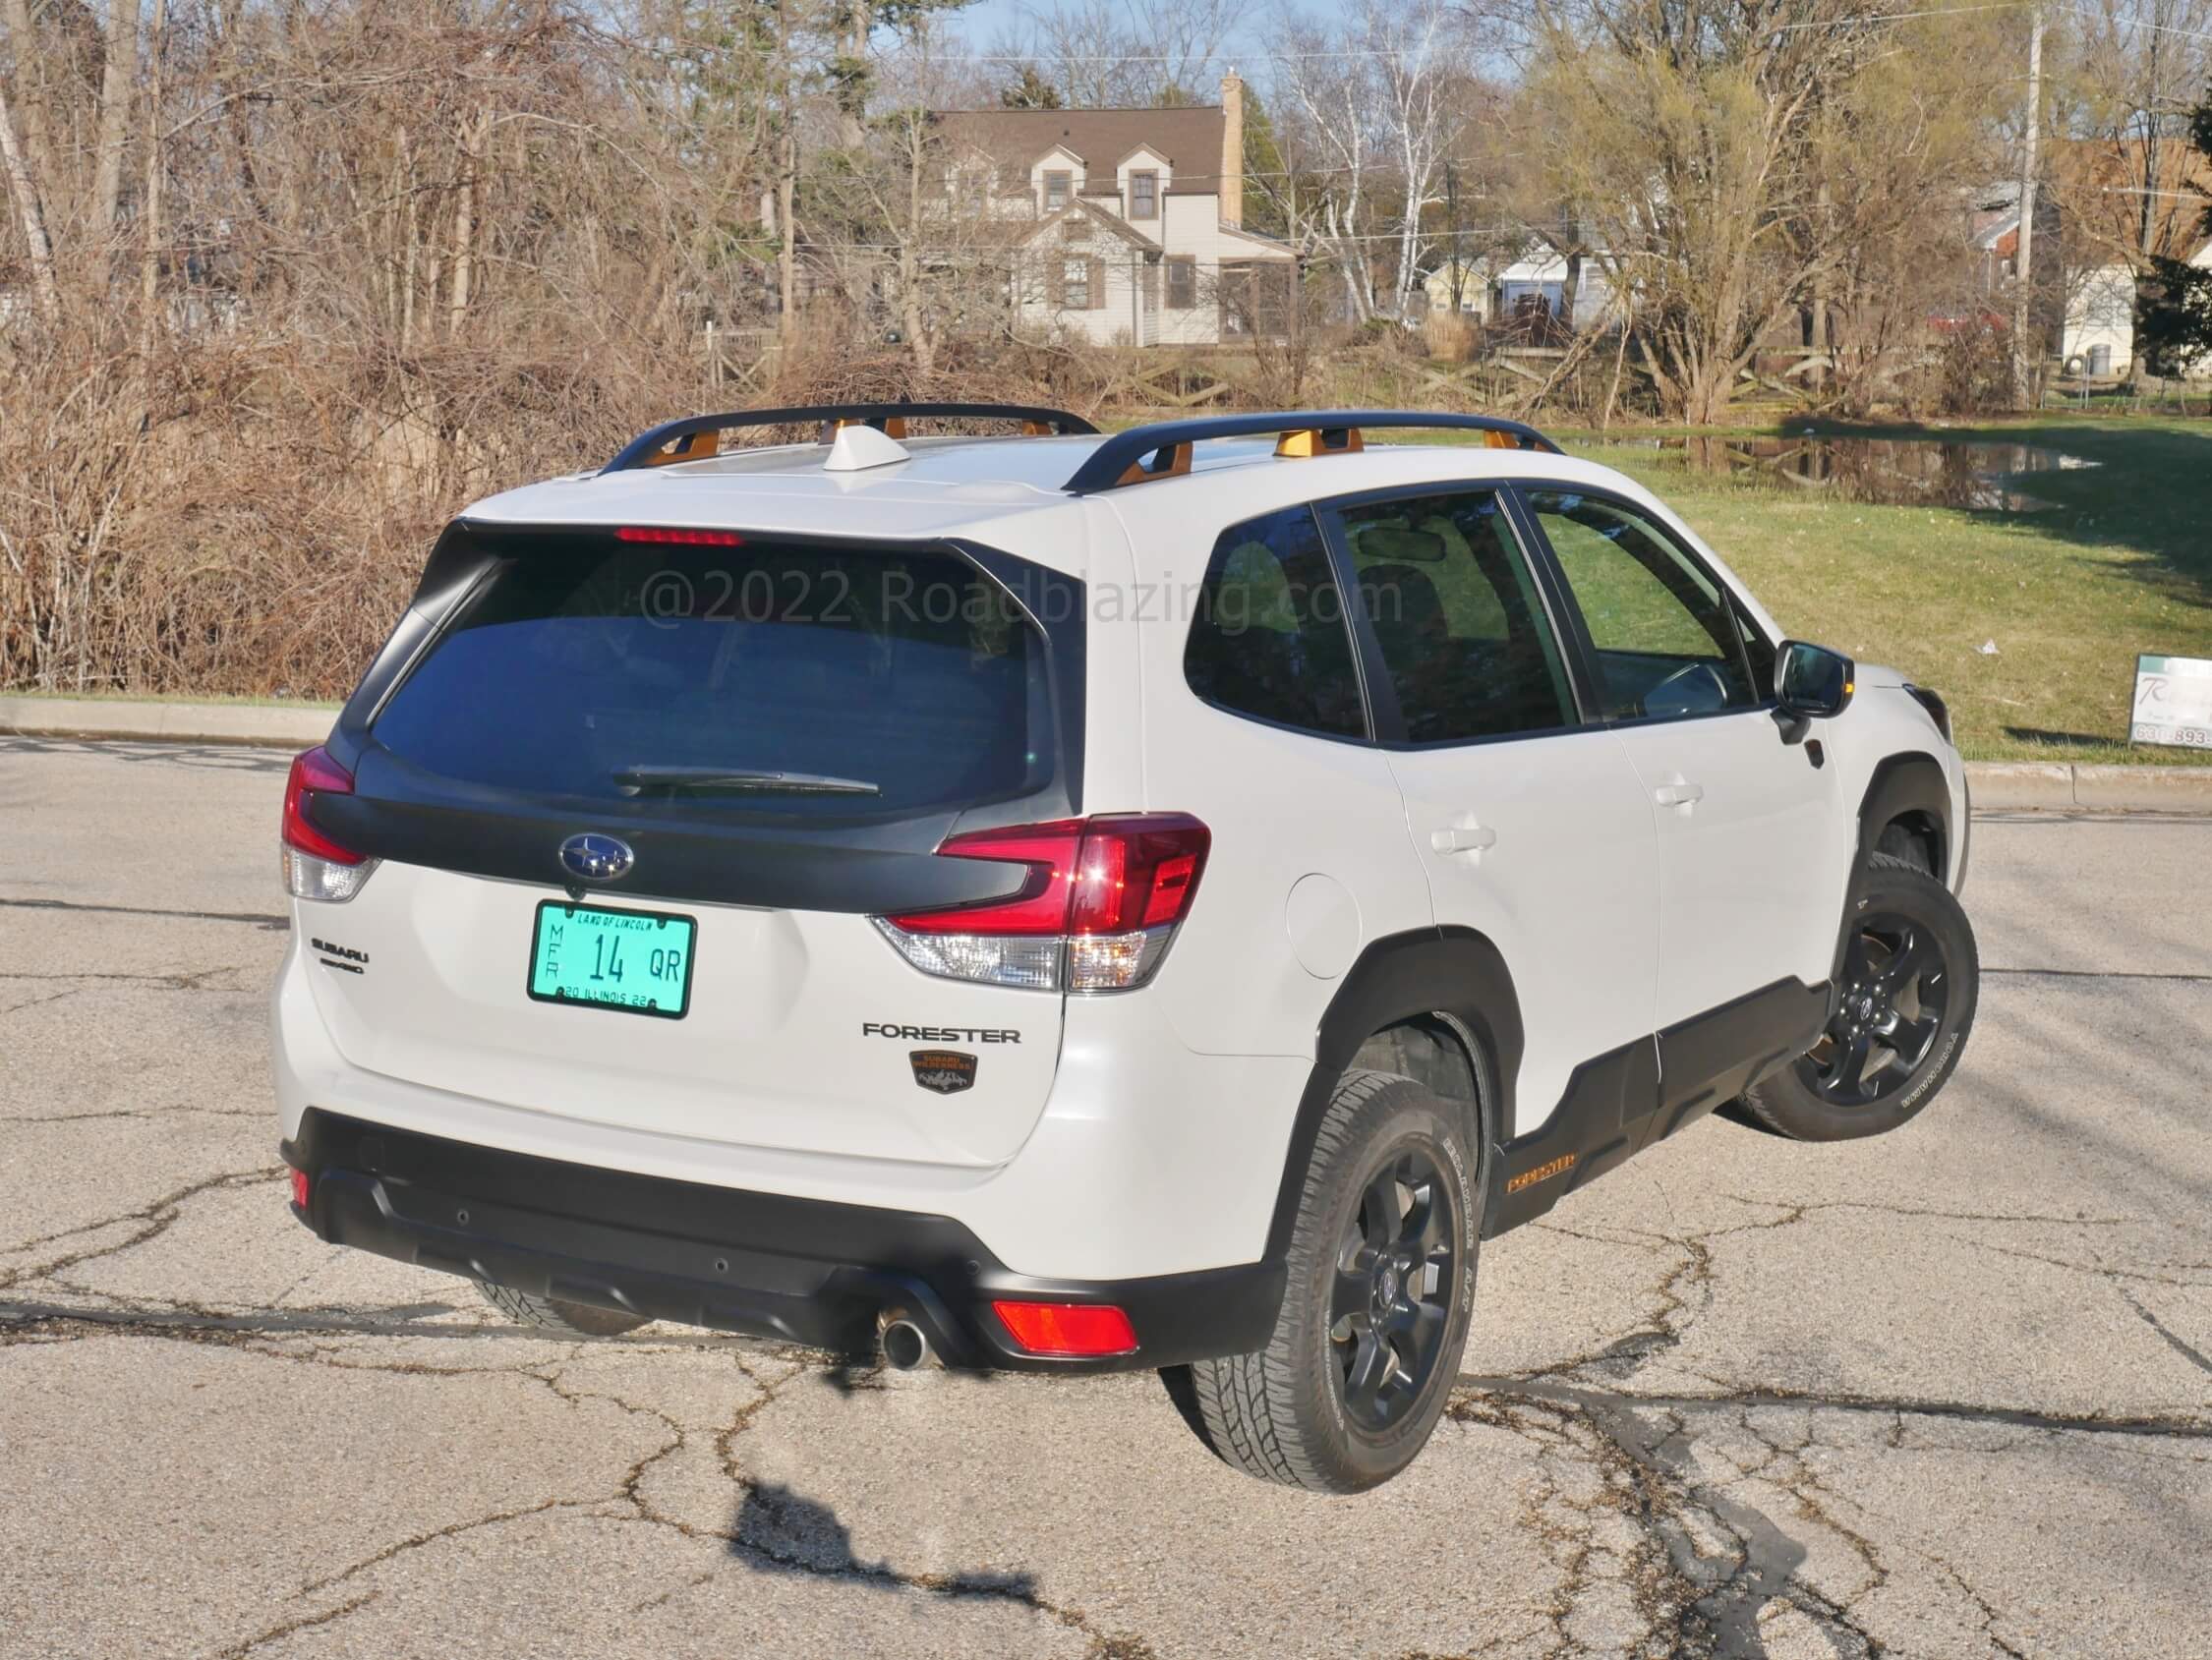 2022 Subaru Forester 2.5L Wilderness AWD: enhanced roof rack supports up to 700 pounds